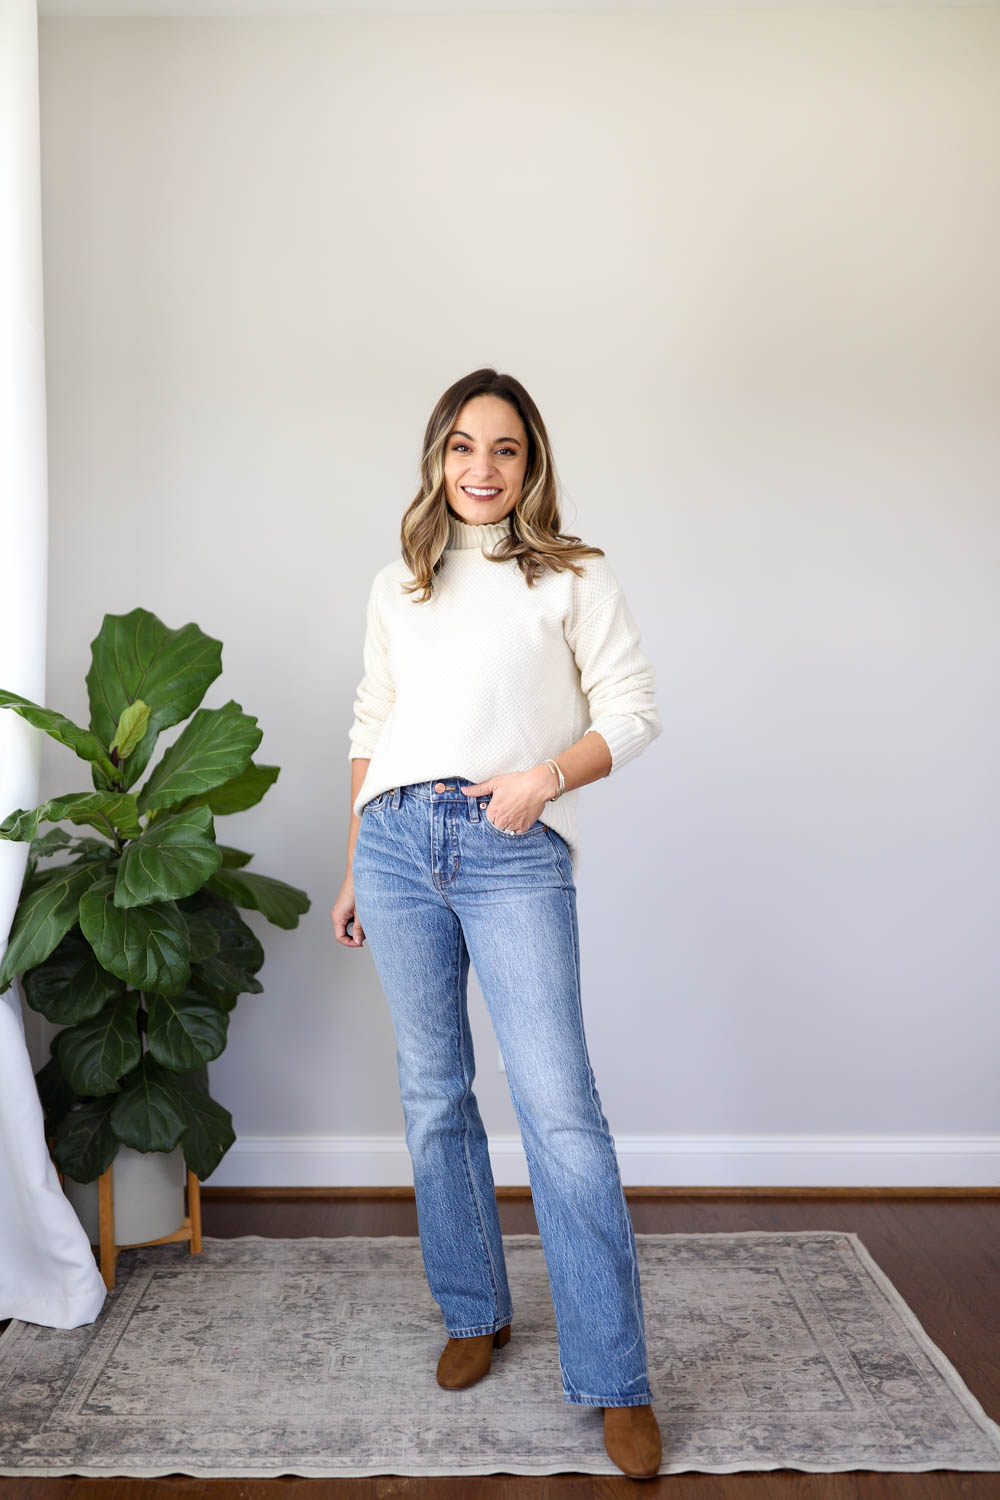 Bootcut Or Skinny Jeans For Petite Or Smaller Women? - THE JEANS BLOG